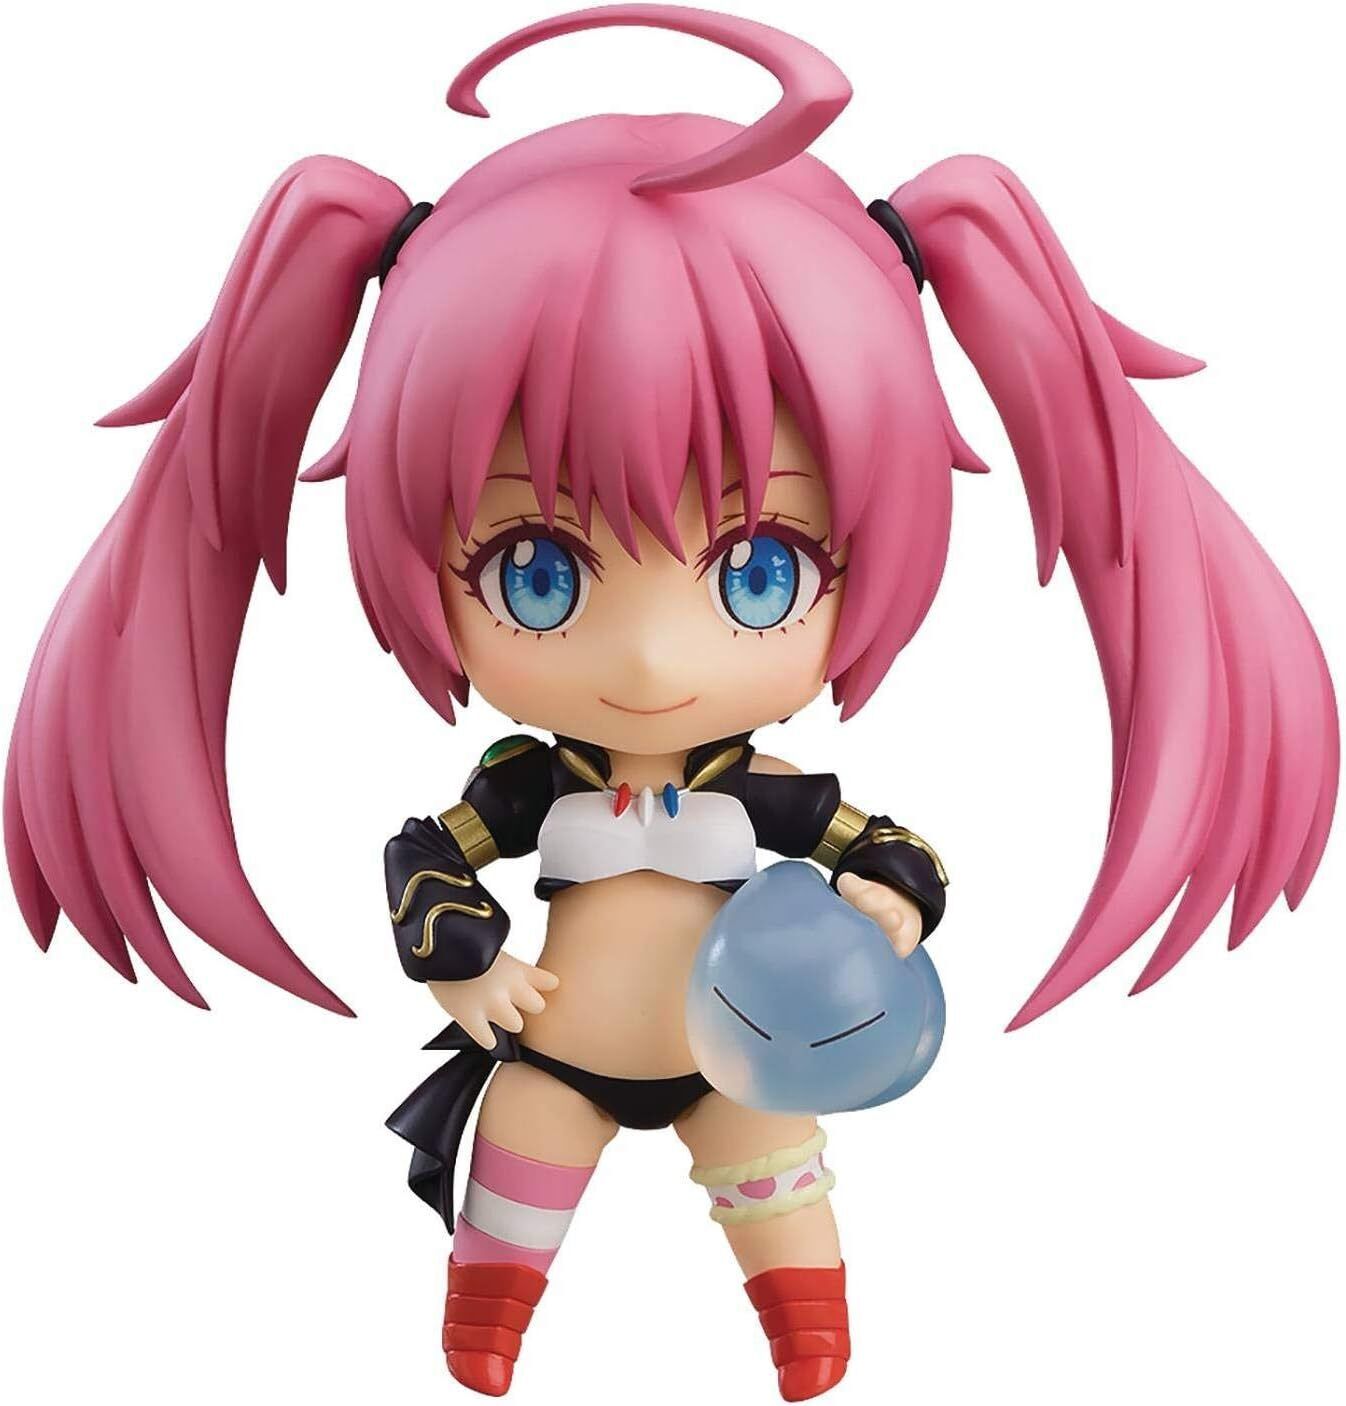 Nendoroid That Time I Got Reincarnated as a Slime Milim Nava Action Figure